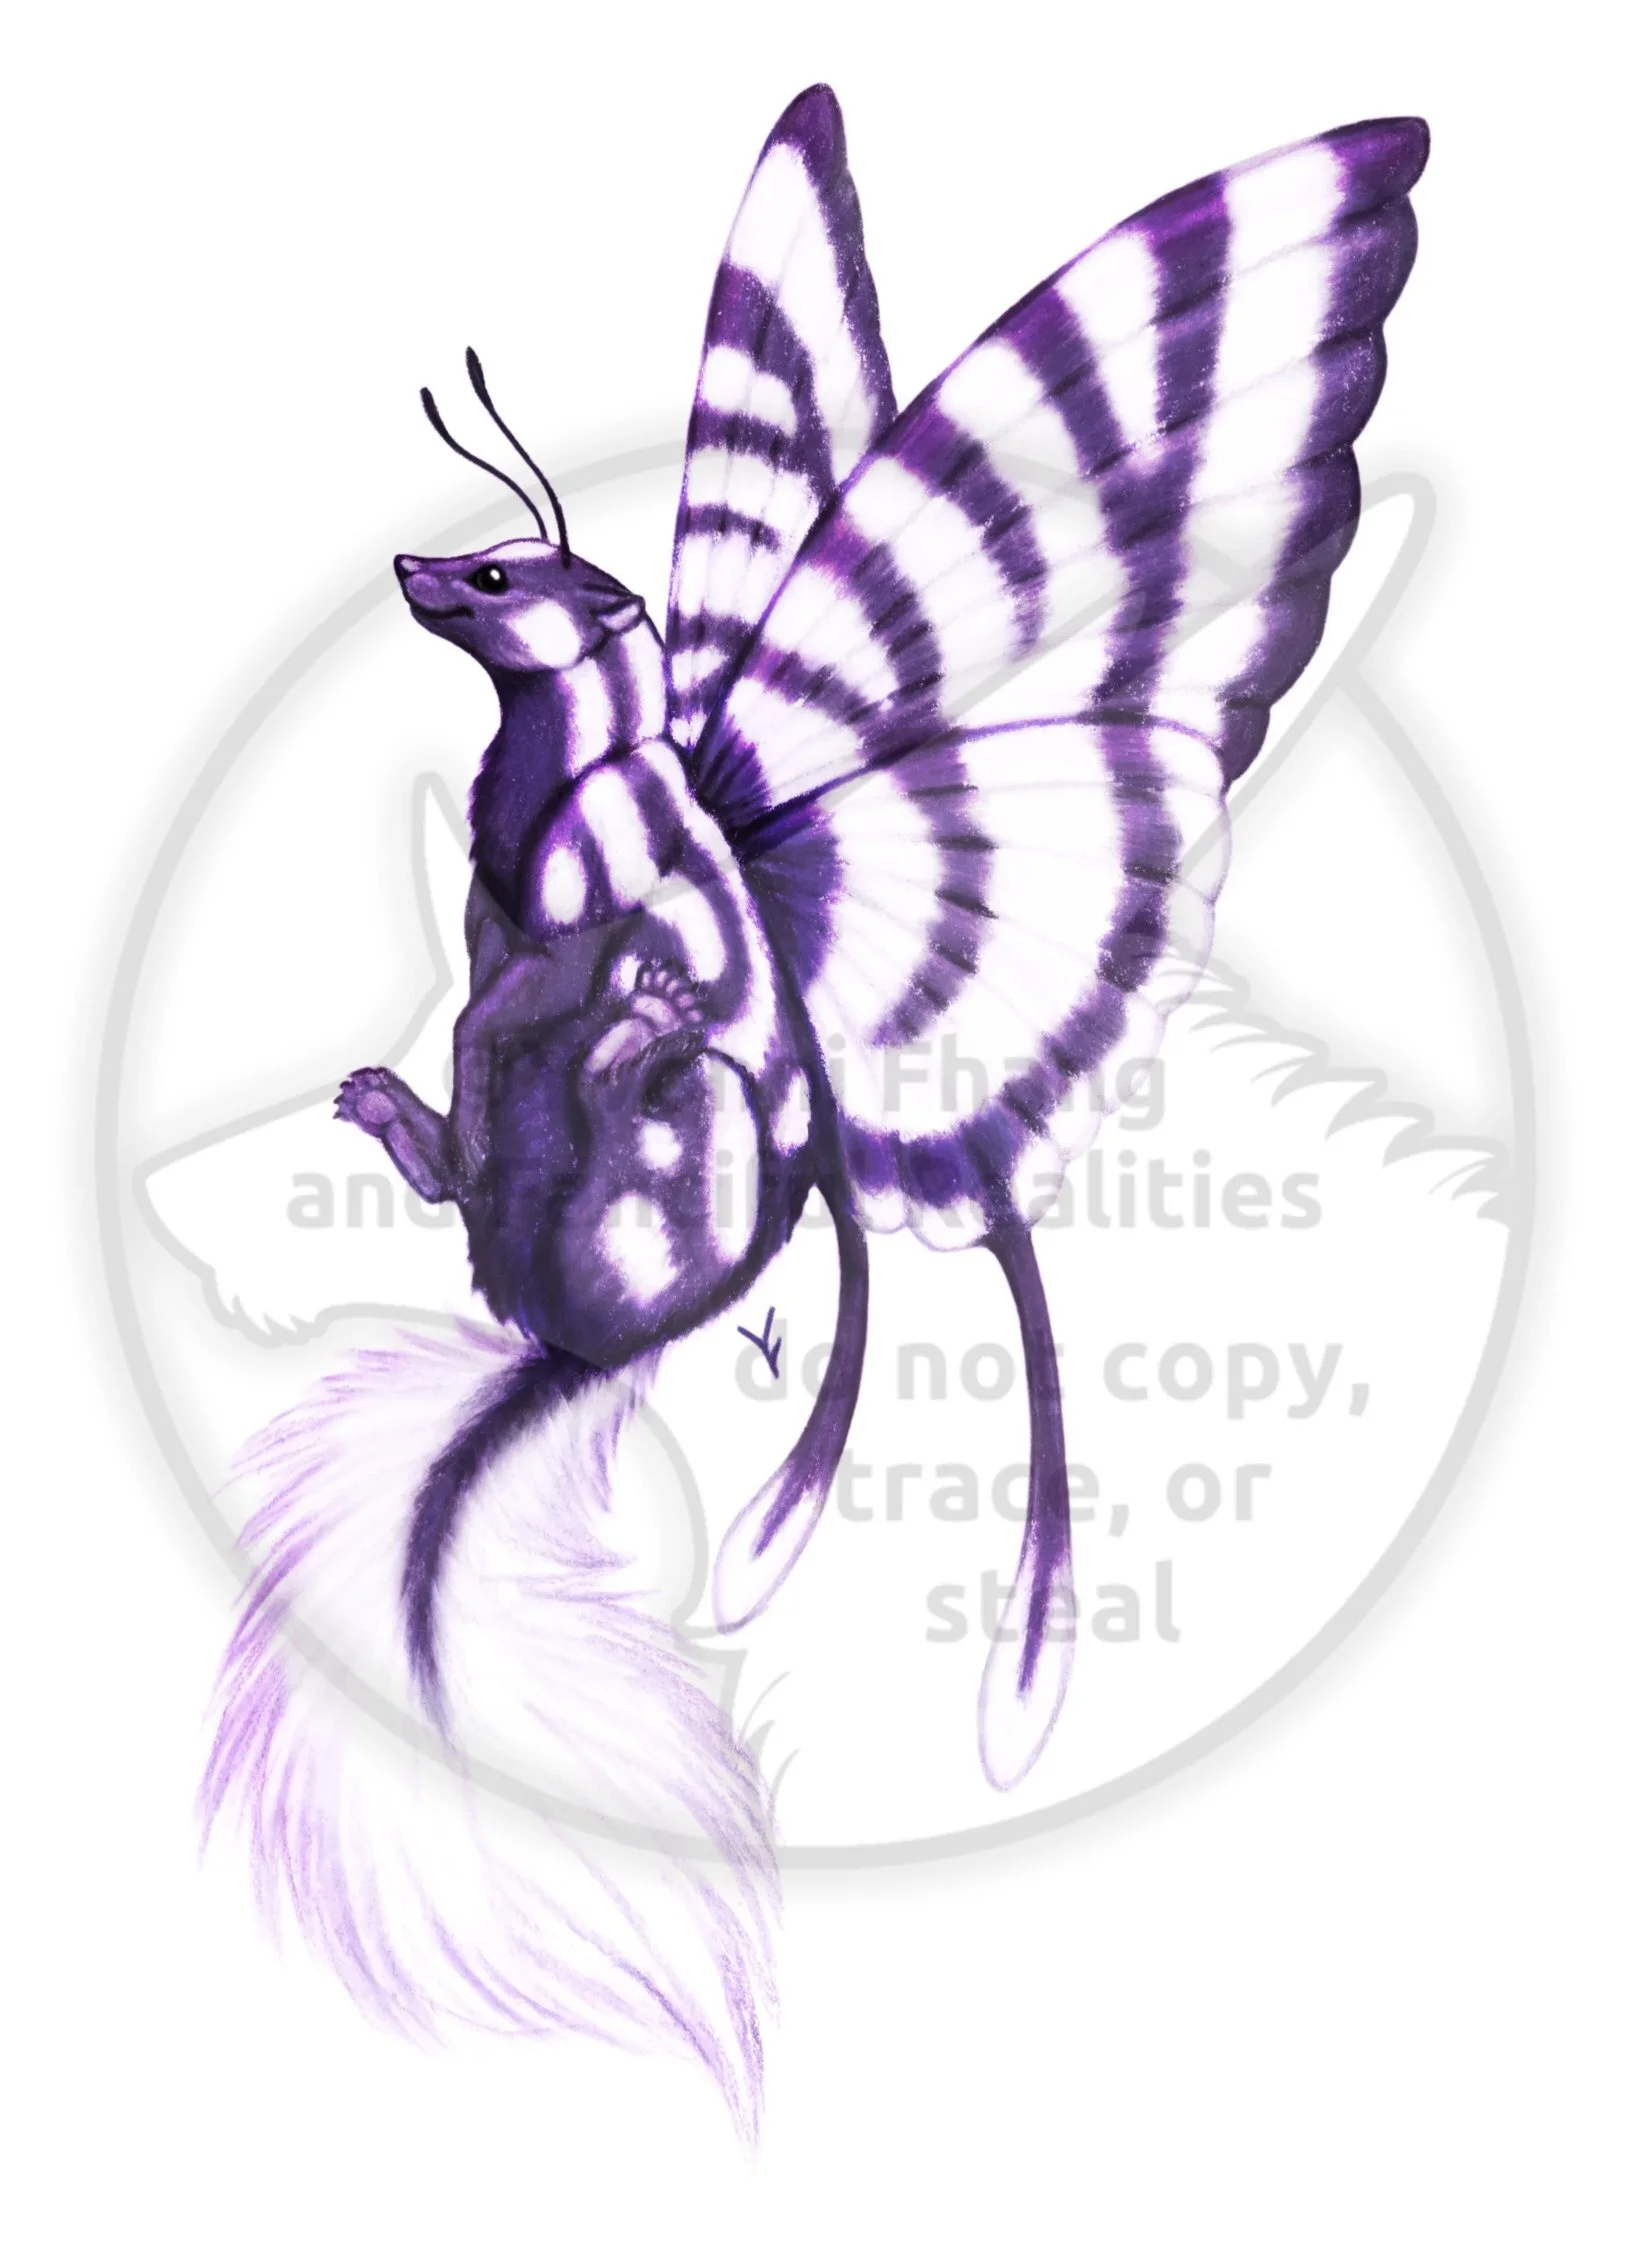 A purple and white butterfly mixed with a cute striped skunk!